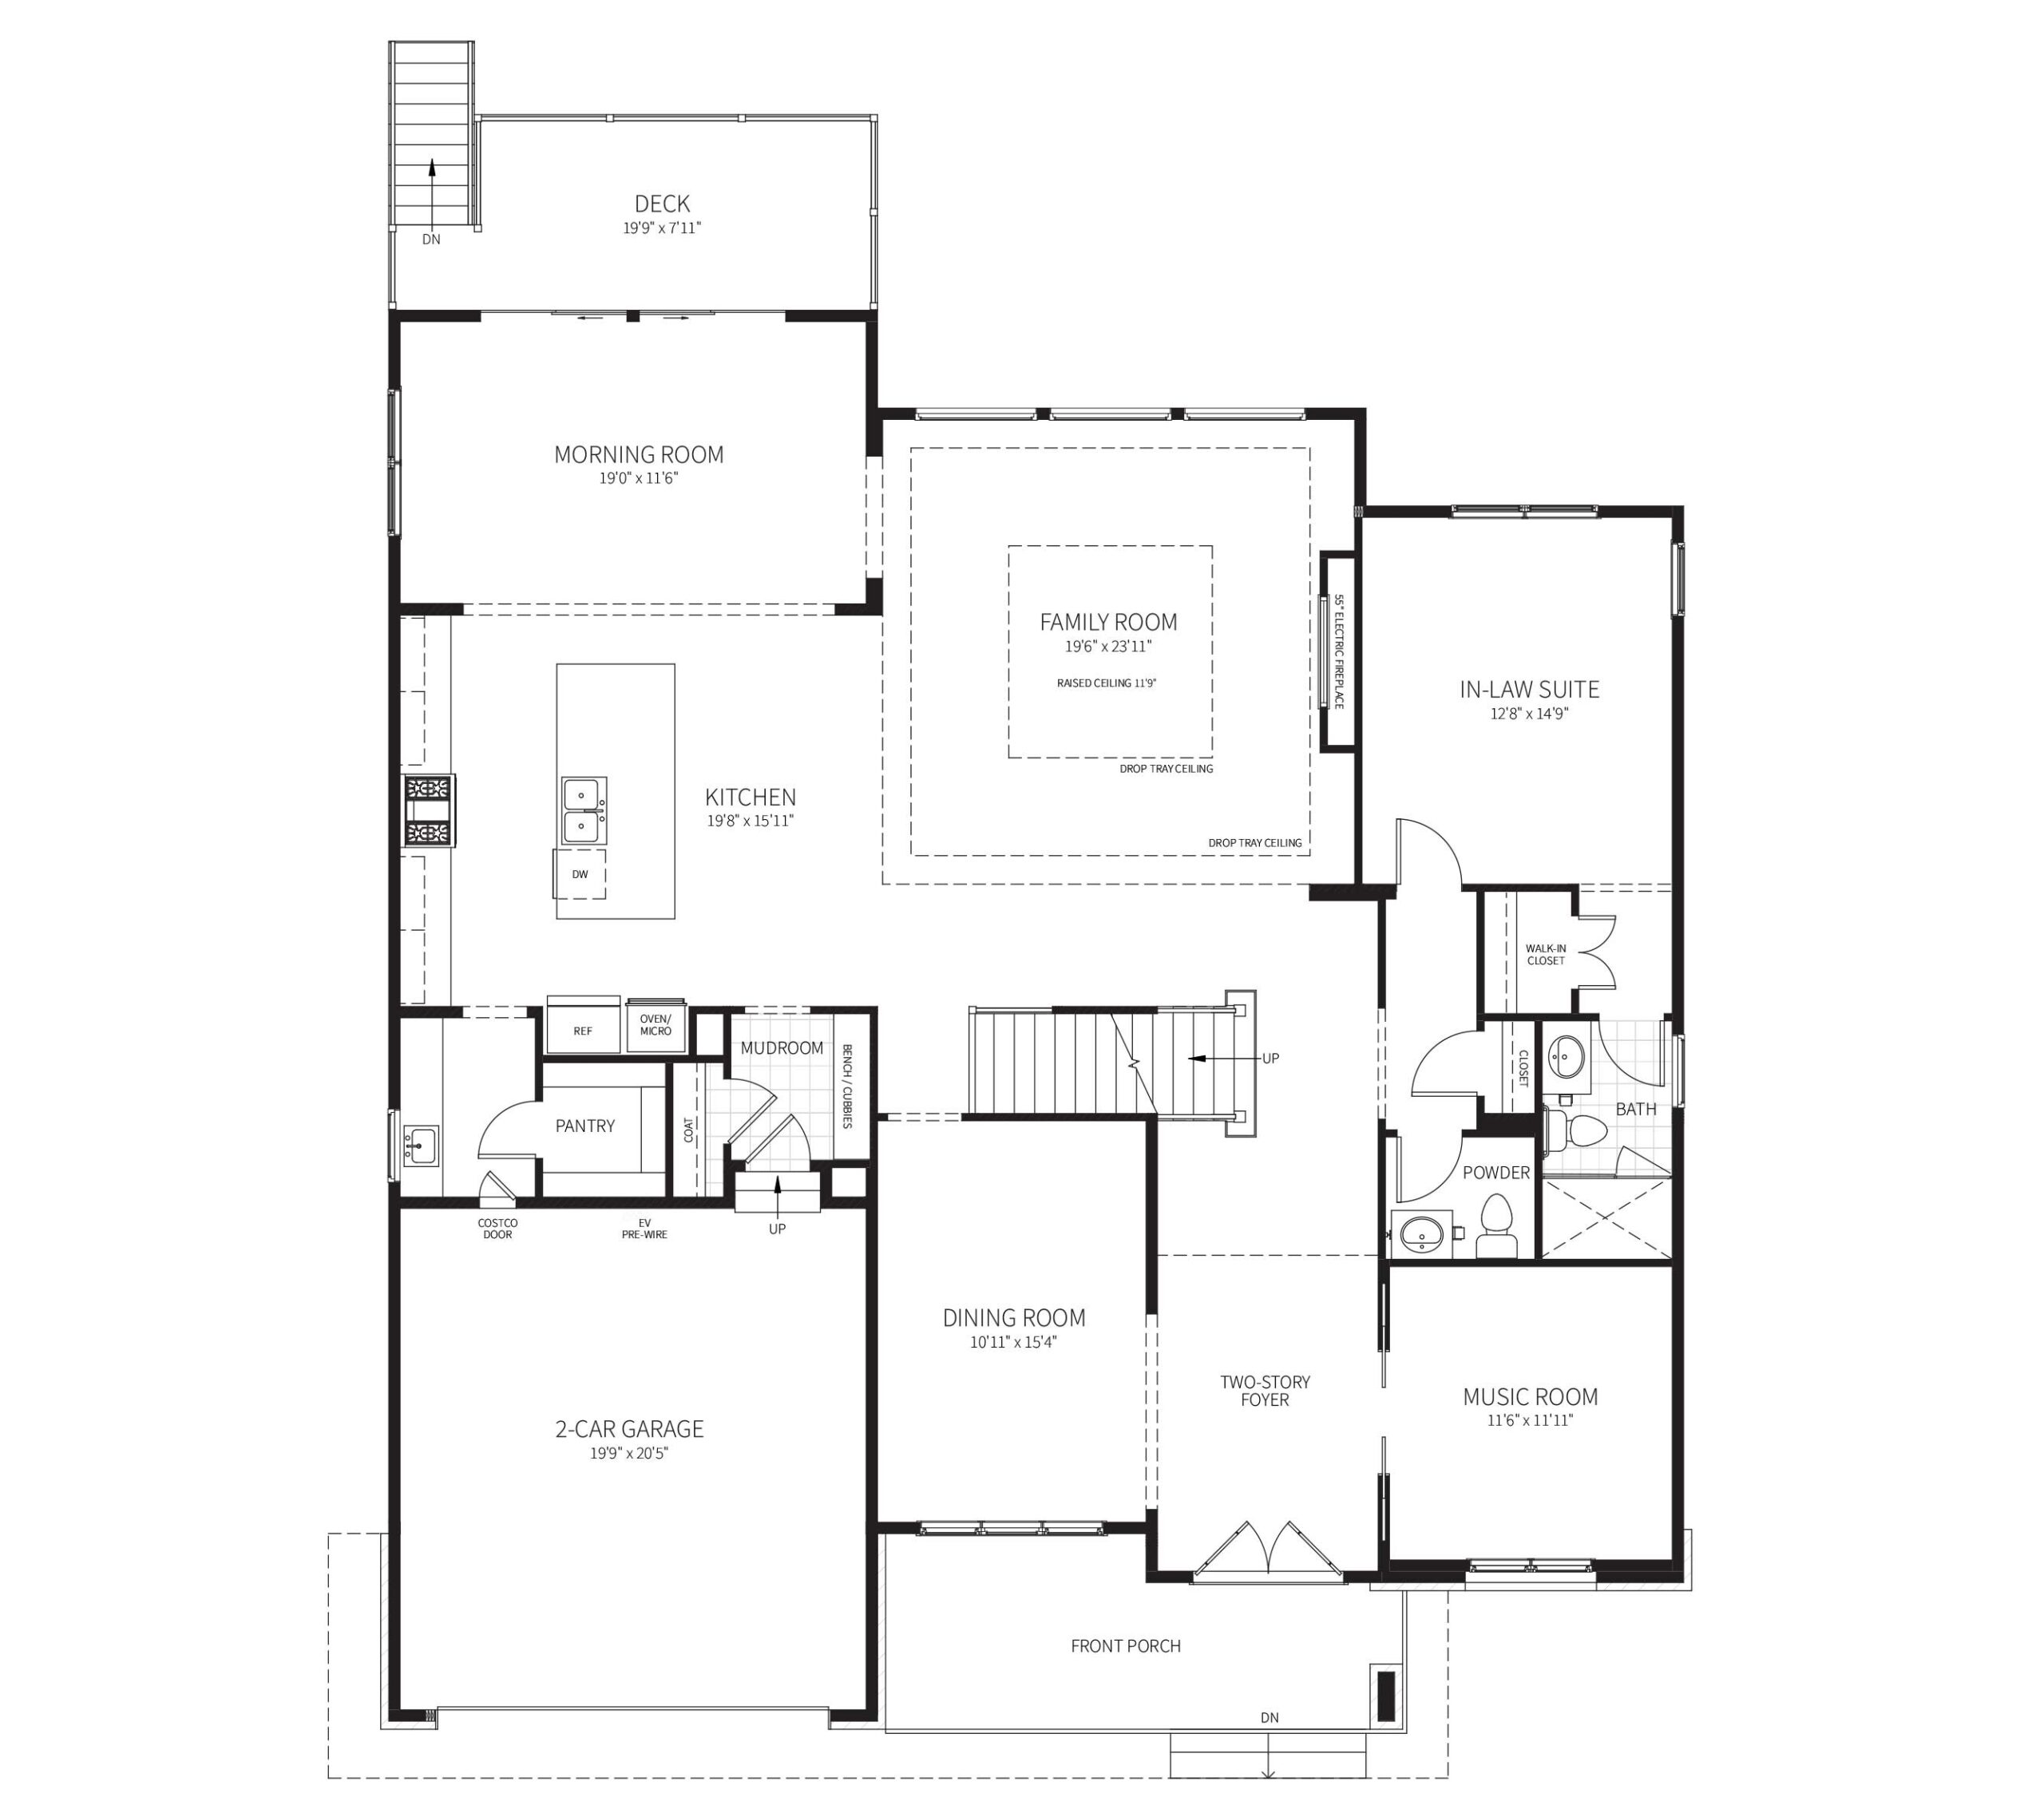 The first floor plan for the home under construction at 6519 Elgin Ln, includes In Law Suite and rear Deck.